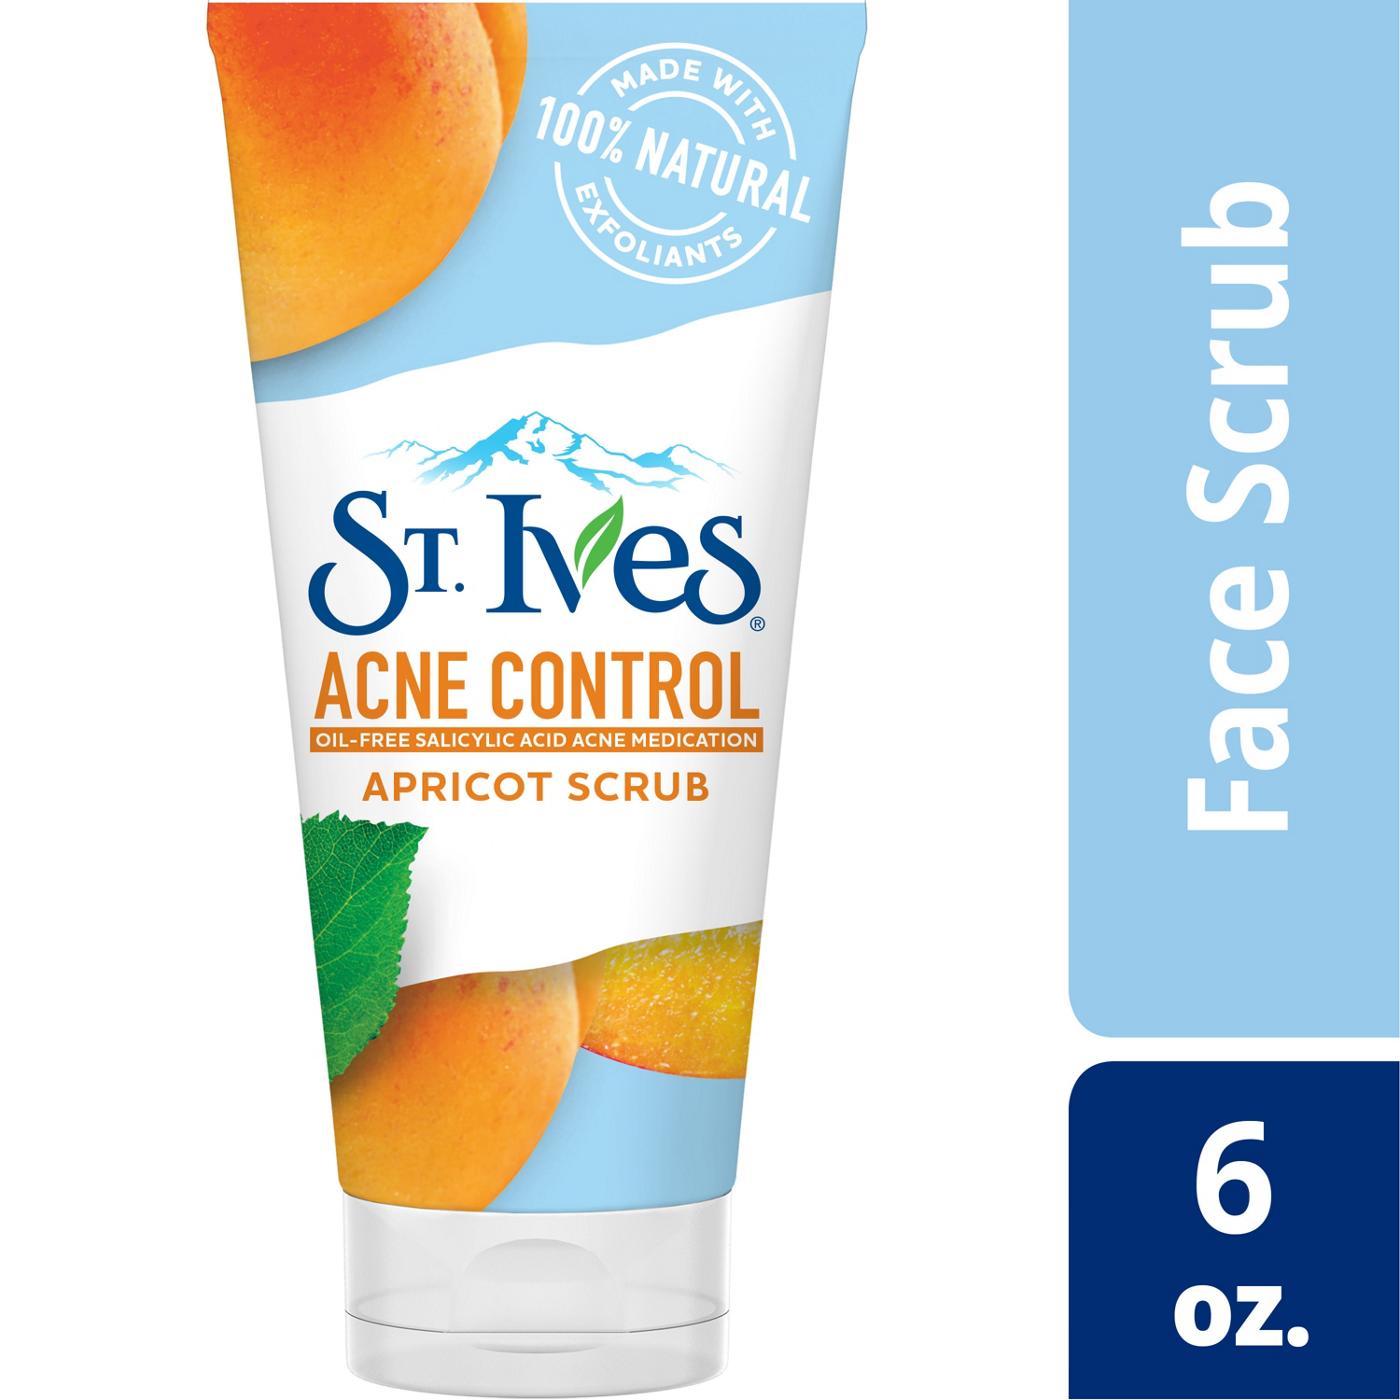 St. Ives Acne Control Face Scrub Apricot; image 2 of 3